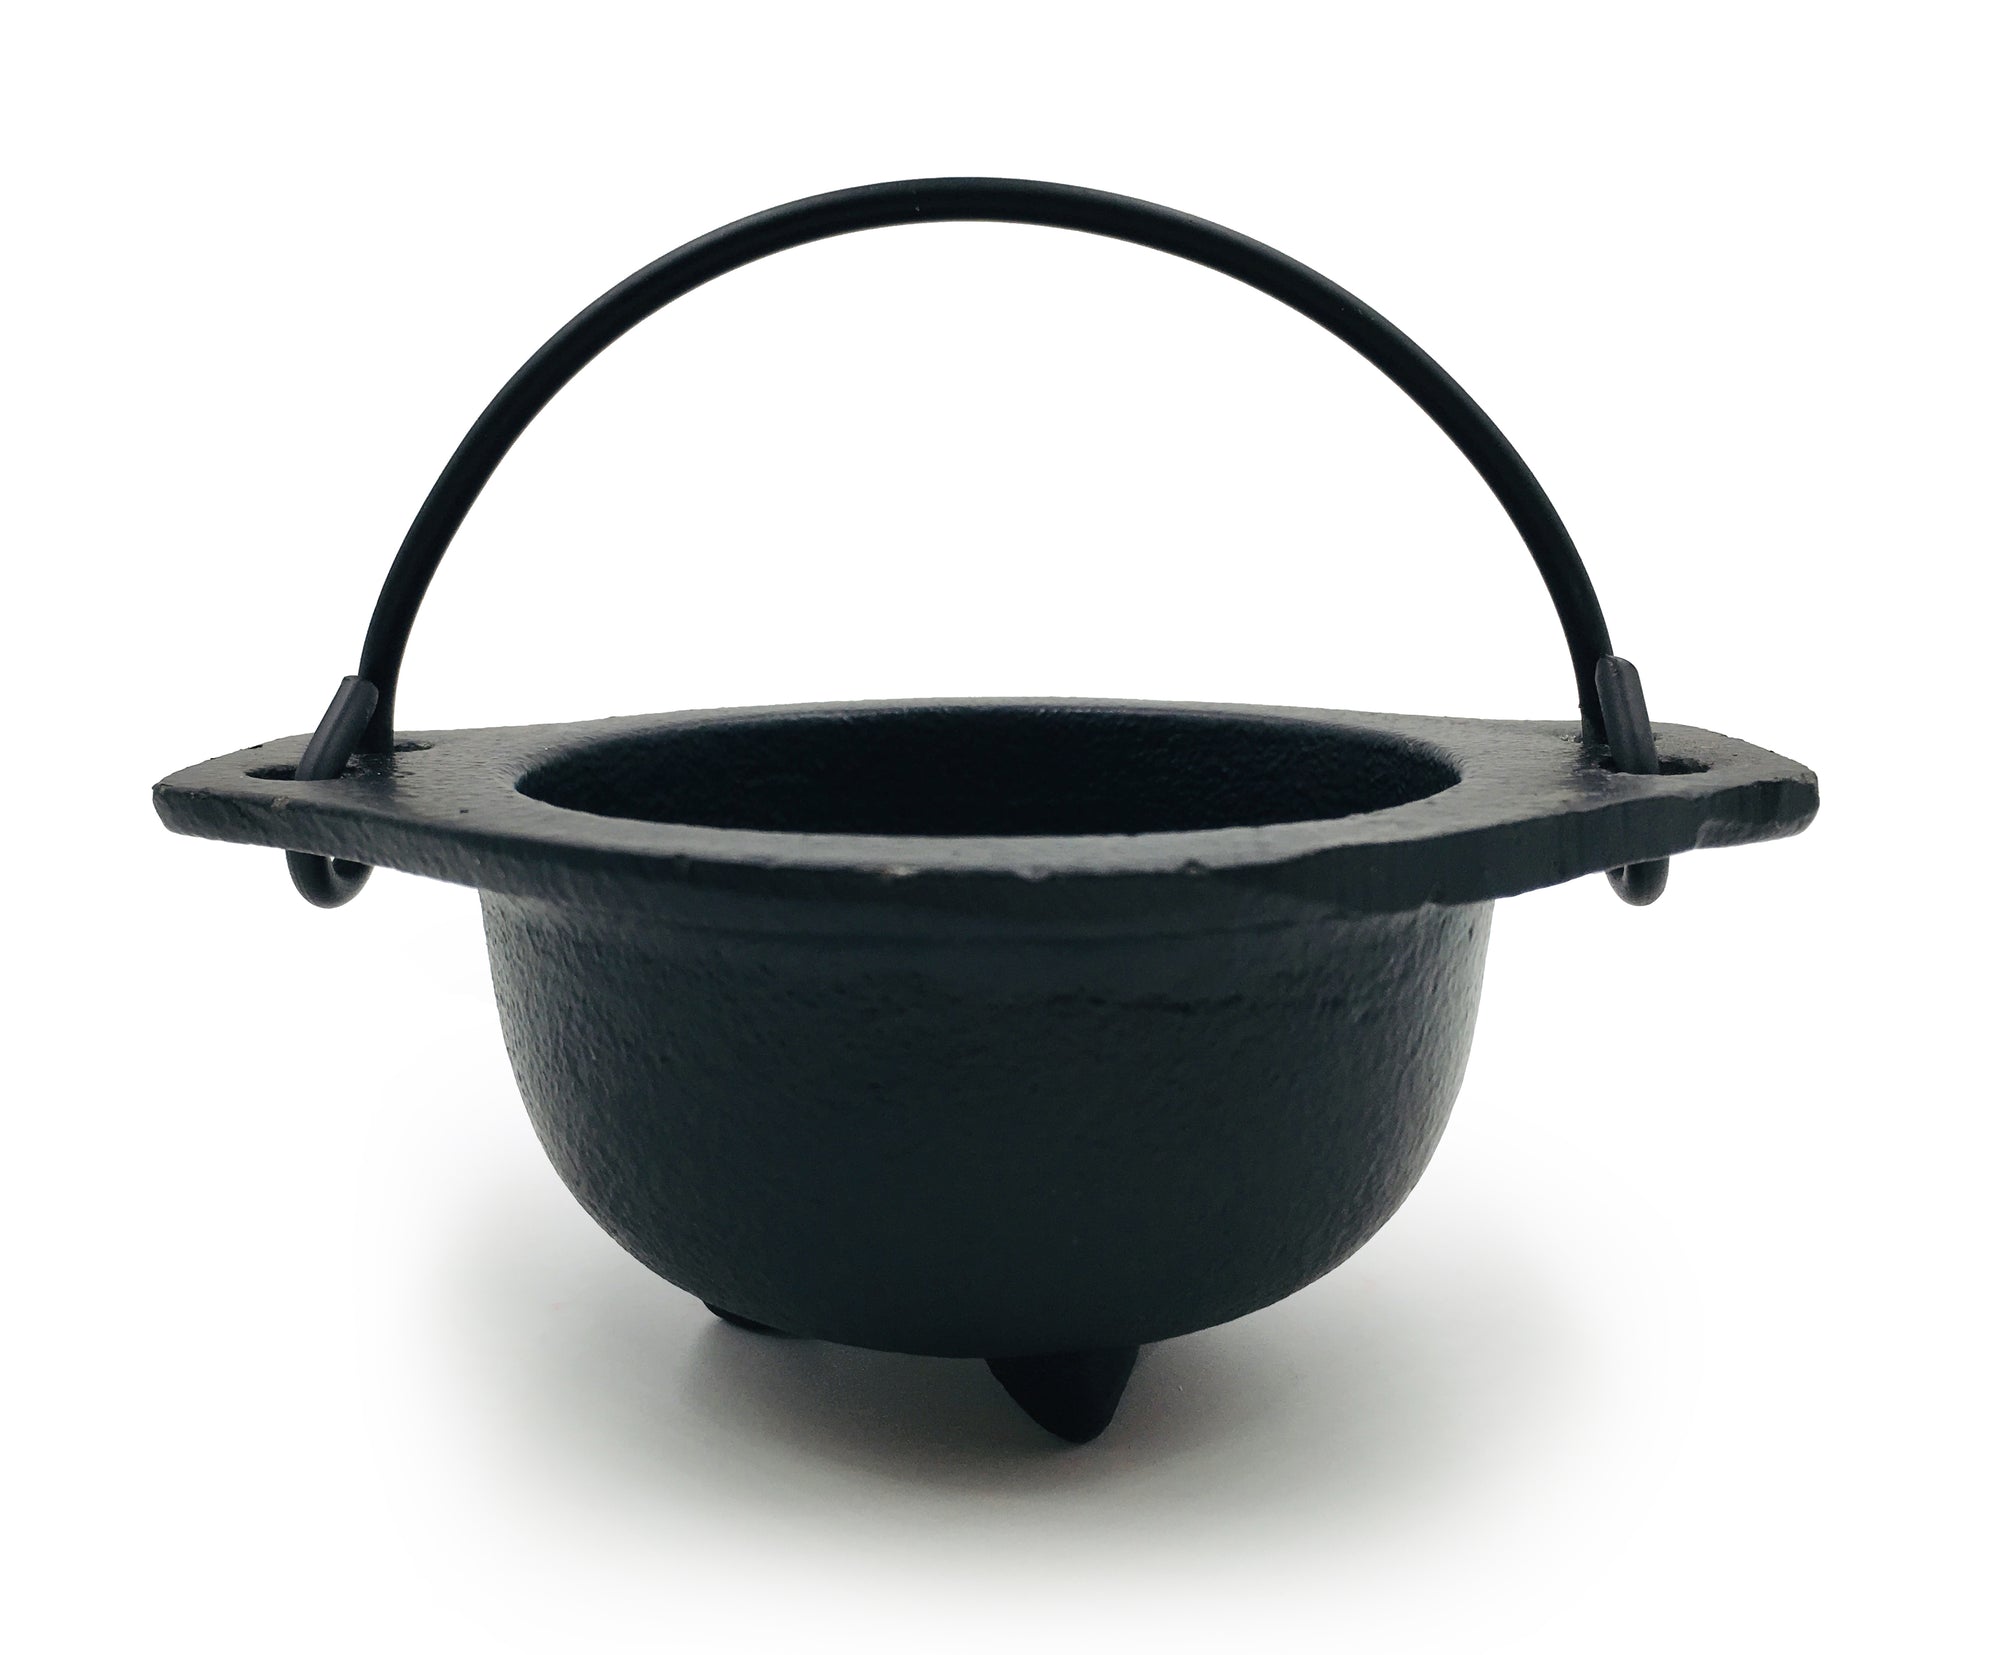 Cast Iron Cauldron for Herbs, Spellwork, and More